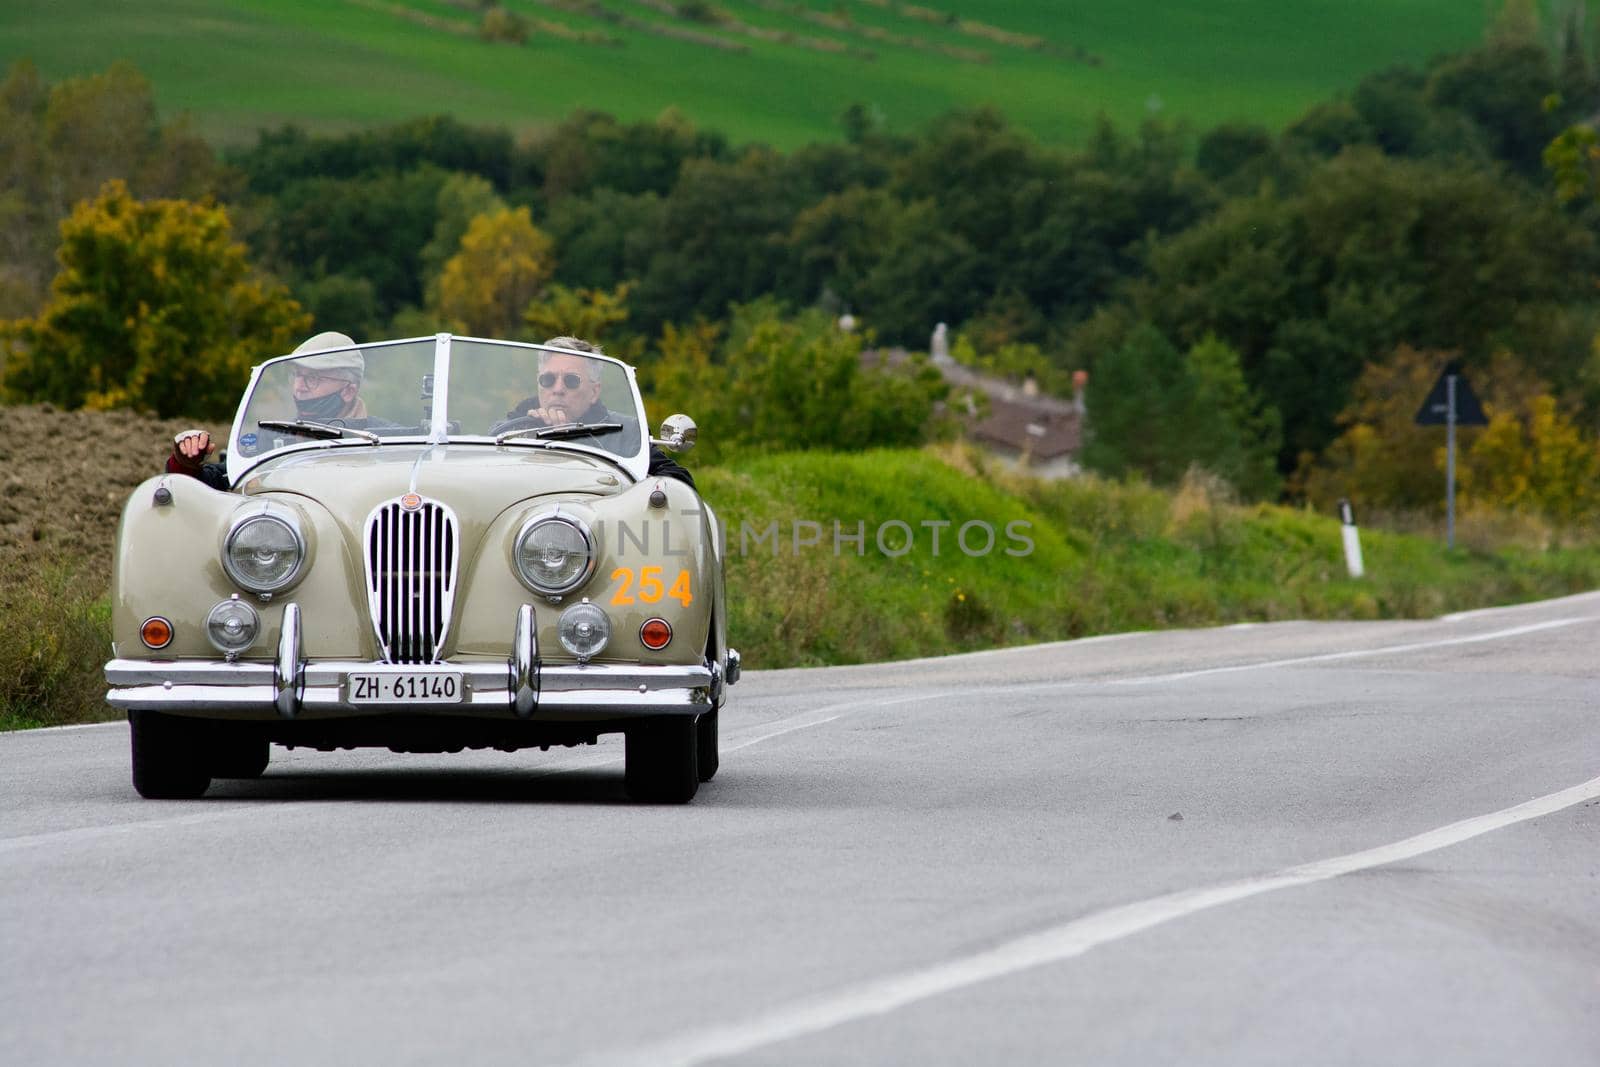 CAGLI , ITALY - OTT 24 - 2020 : JAGUAR XK 140 OTS SE 1954 on an old racing car in rally Mille Miglia 2020 the famous italian historical race (1927-1957